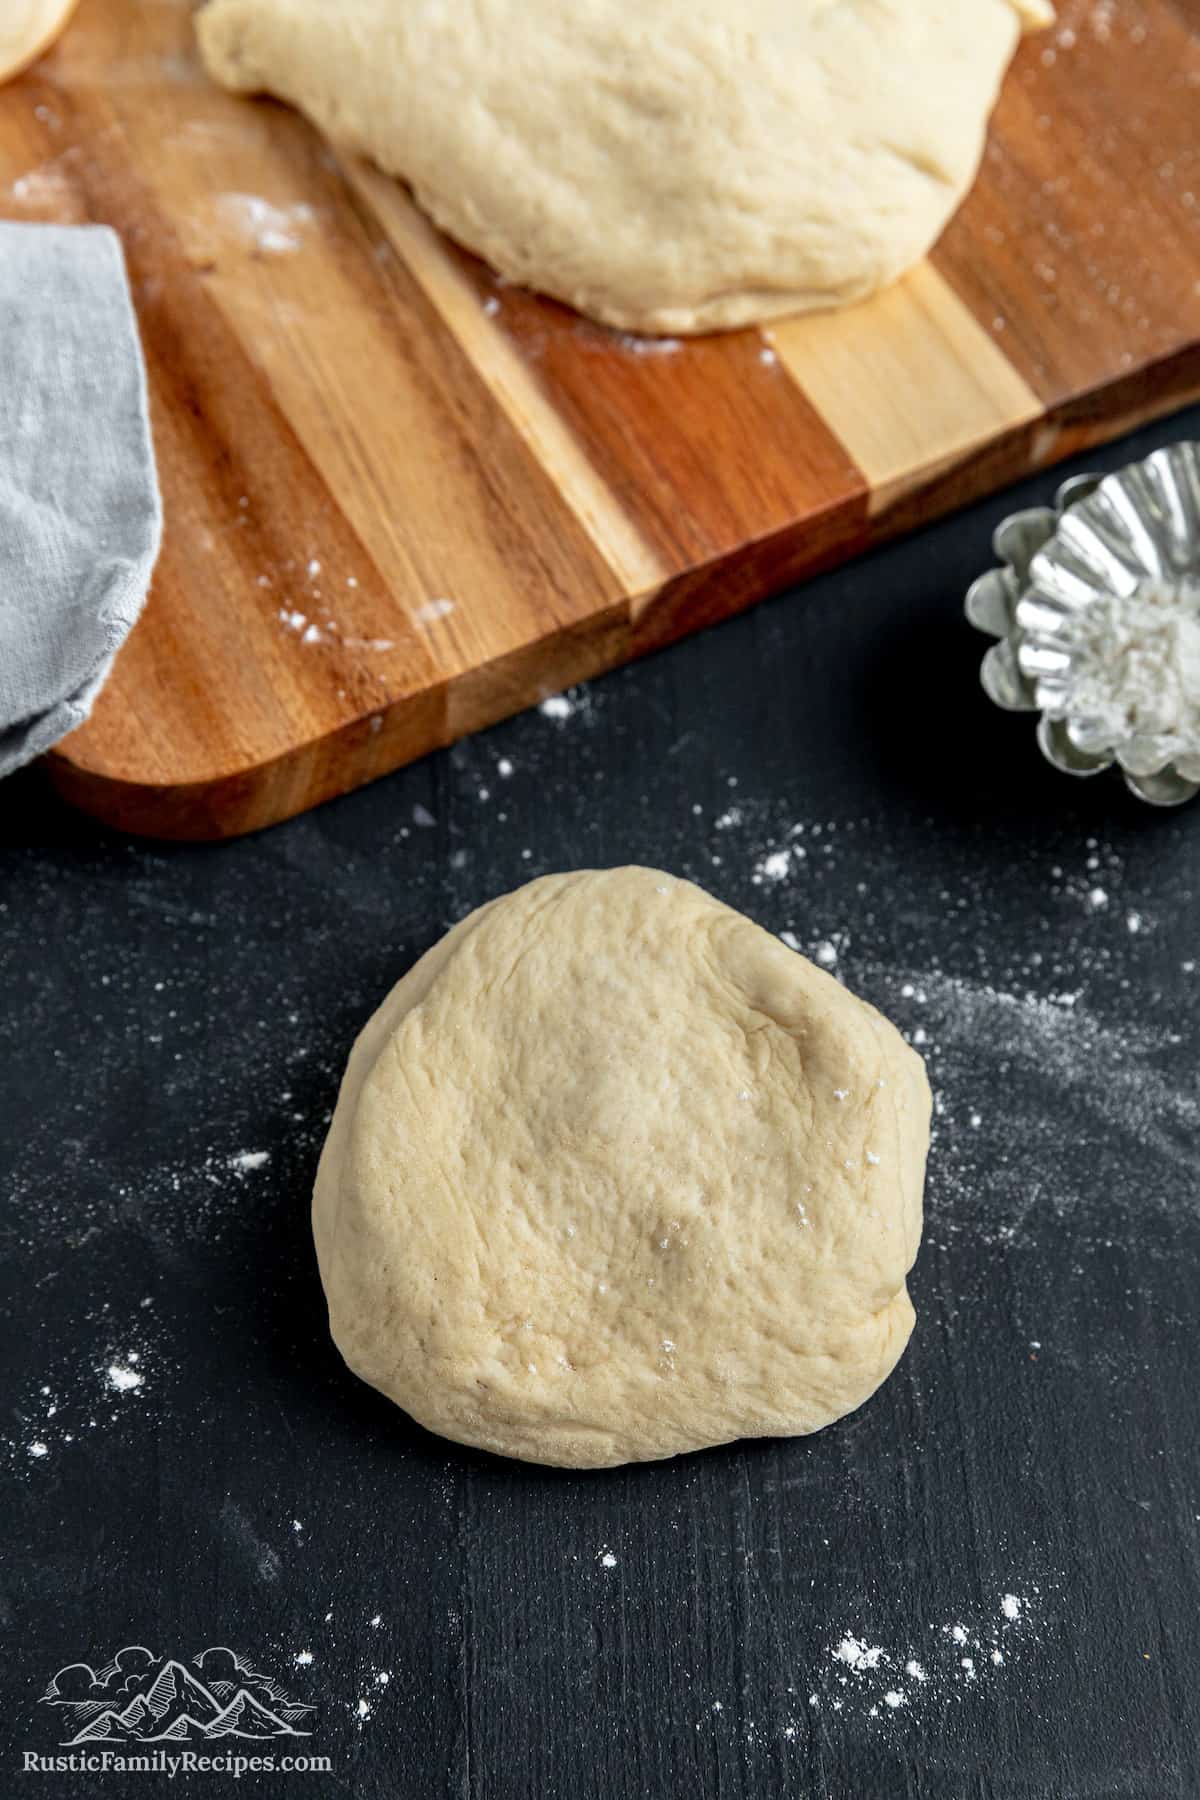 A disc of dough ready to be shaped